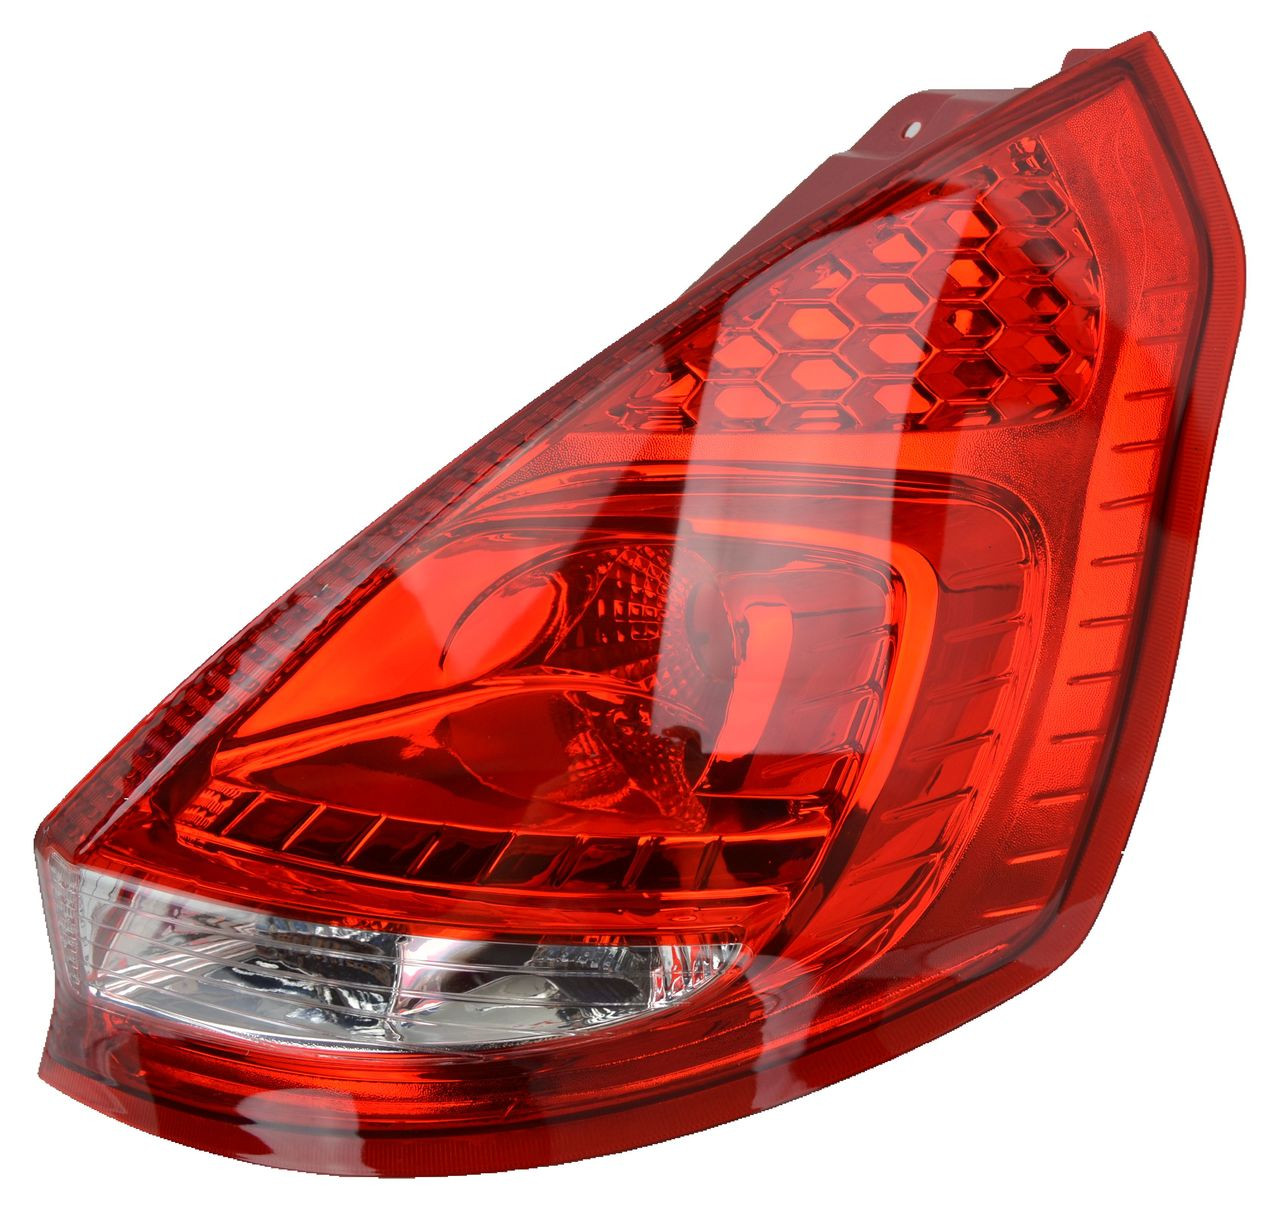 Tail light for Ford Fiesta WS 01/09-07/13 New Right RHS Rear Lamp Hatchback 10 11 12